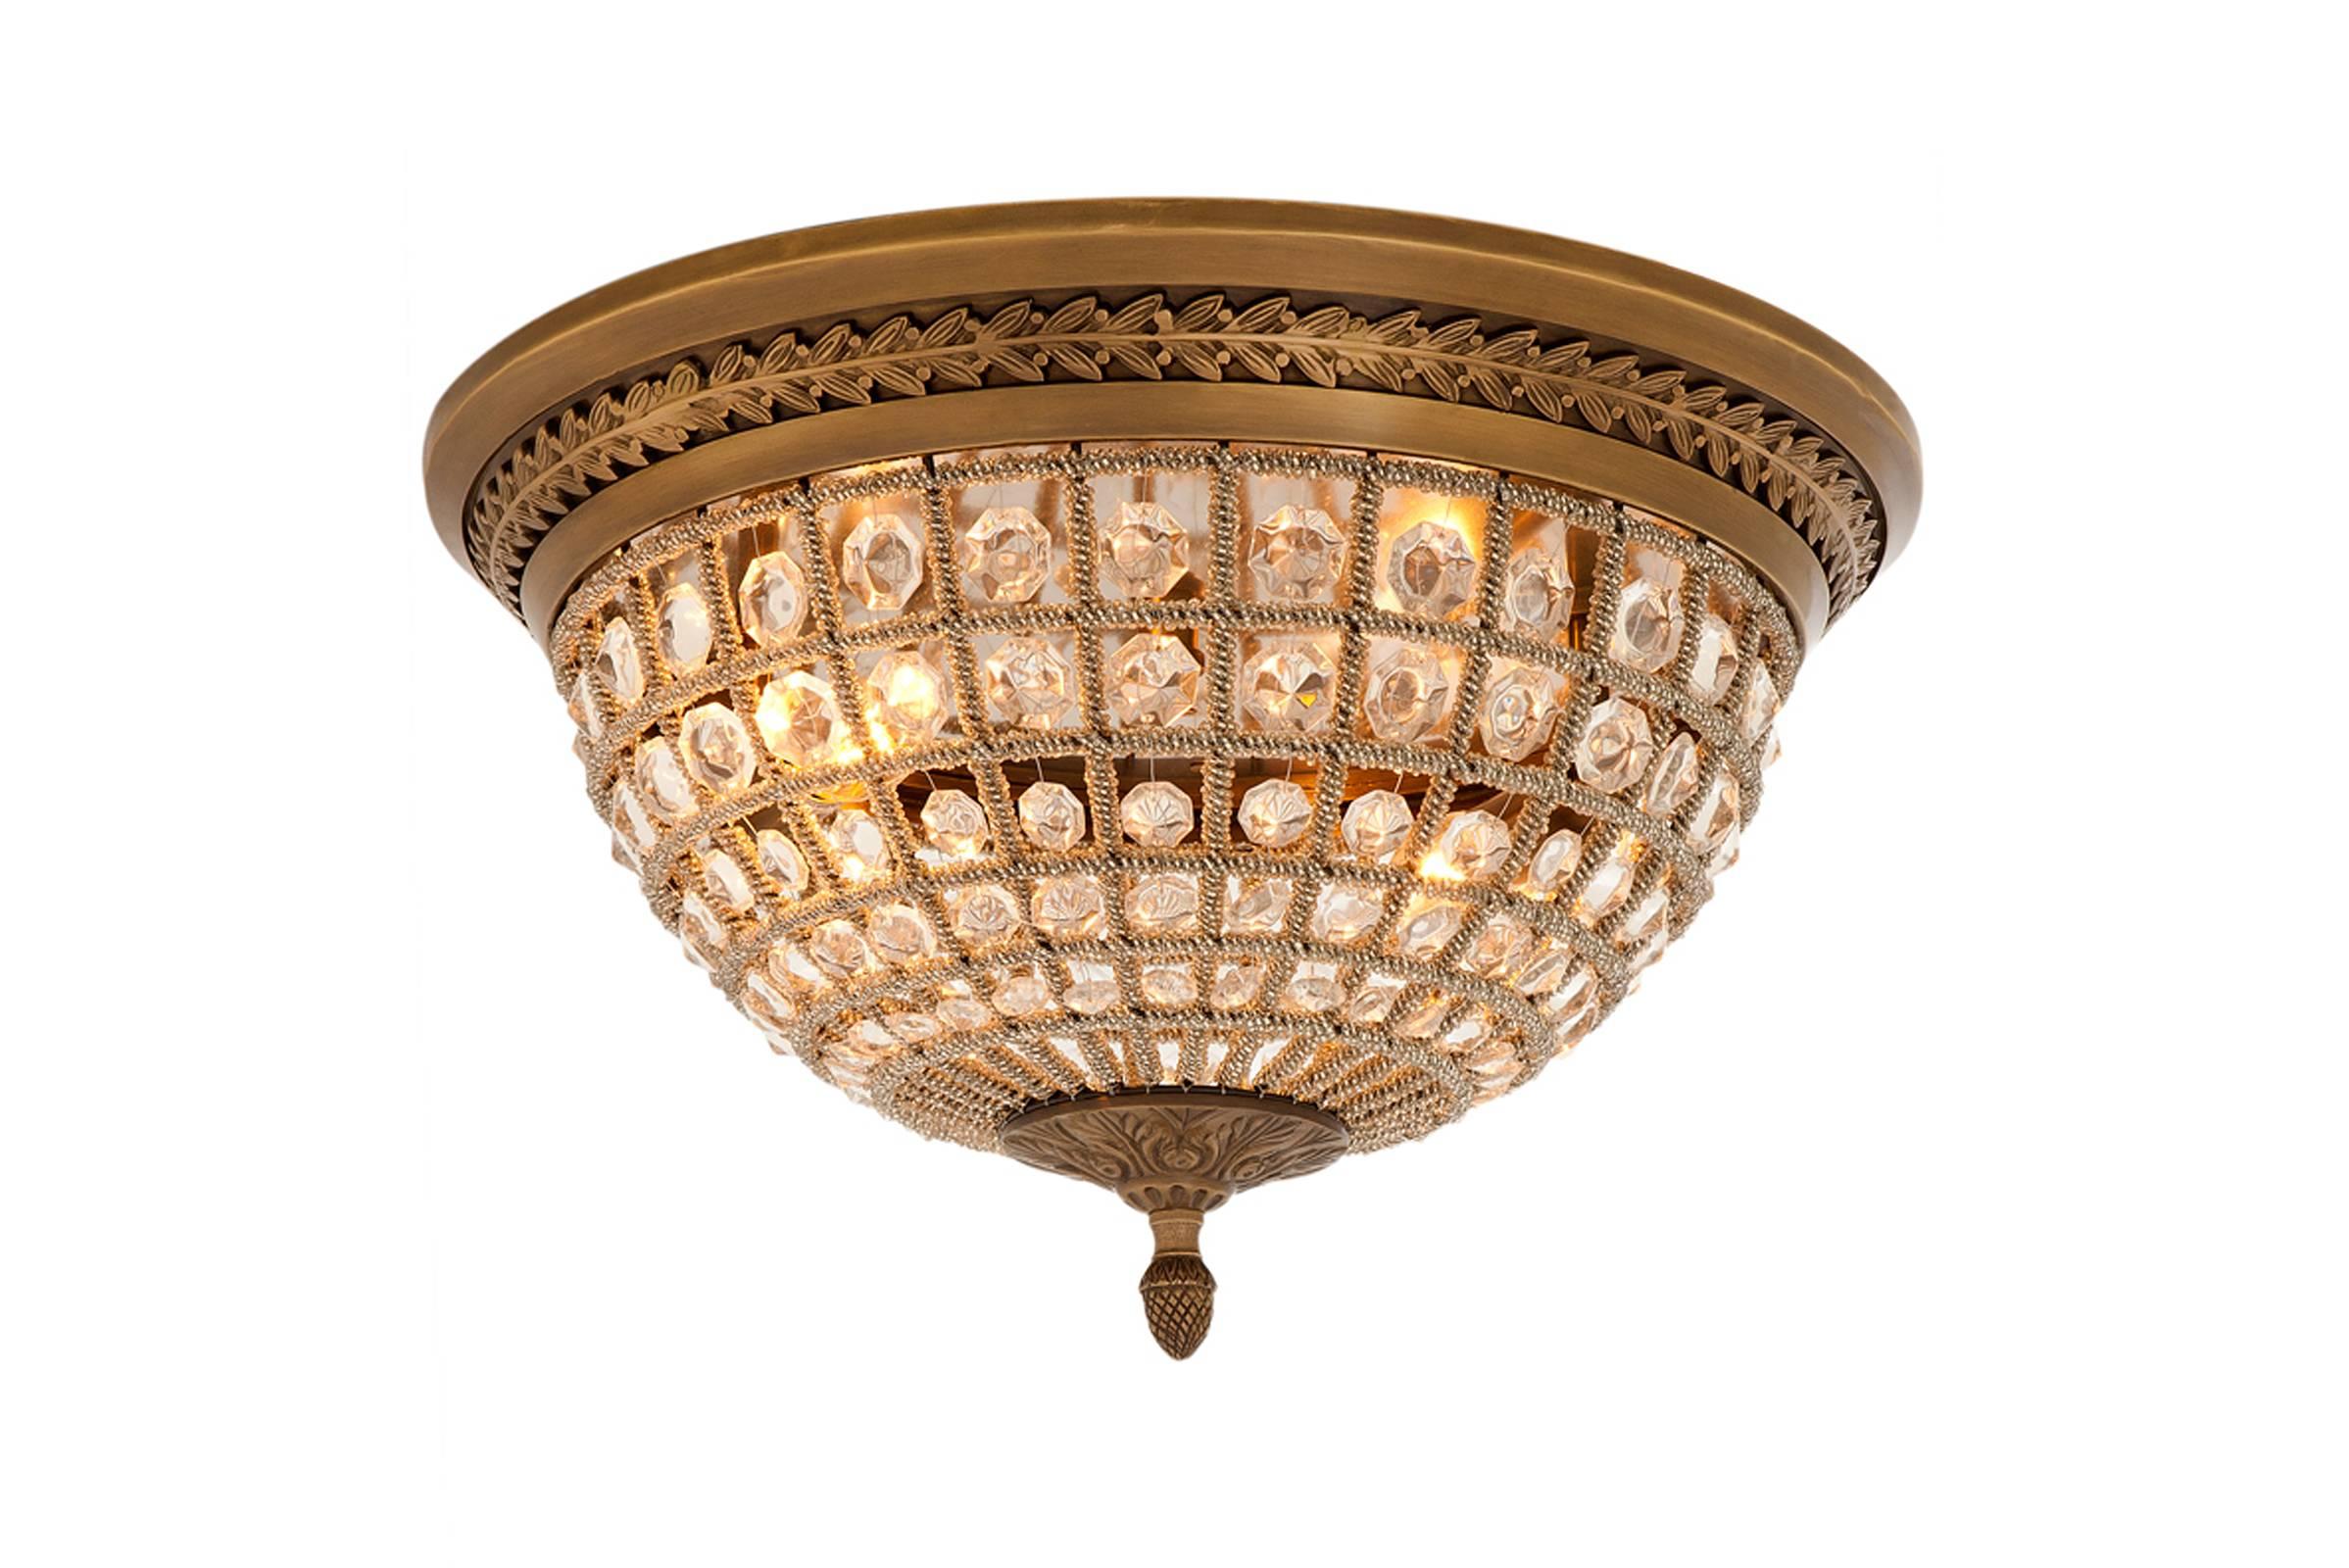 Ceiling lamp arabesque in polished vintage brass
and crystal glass, also available in nickel finish.
